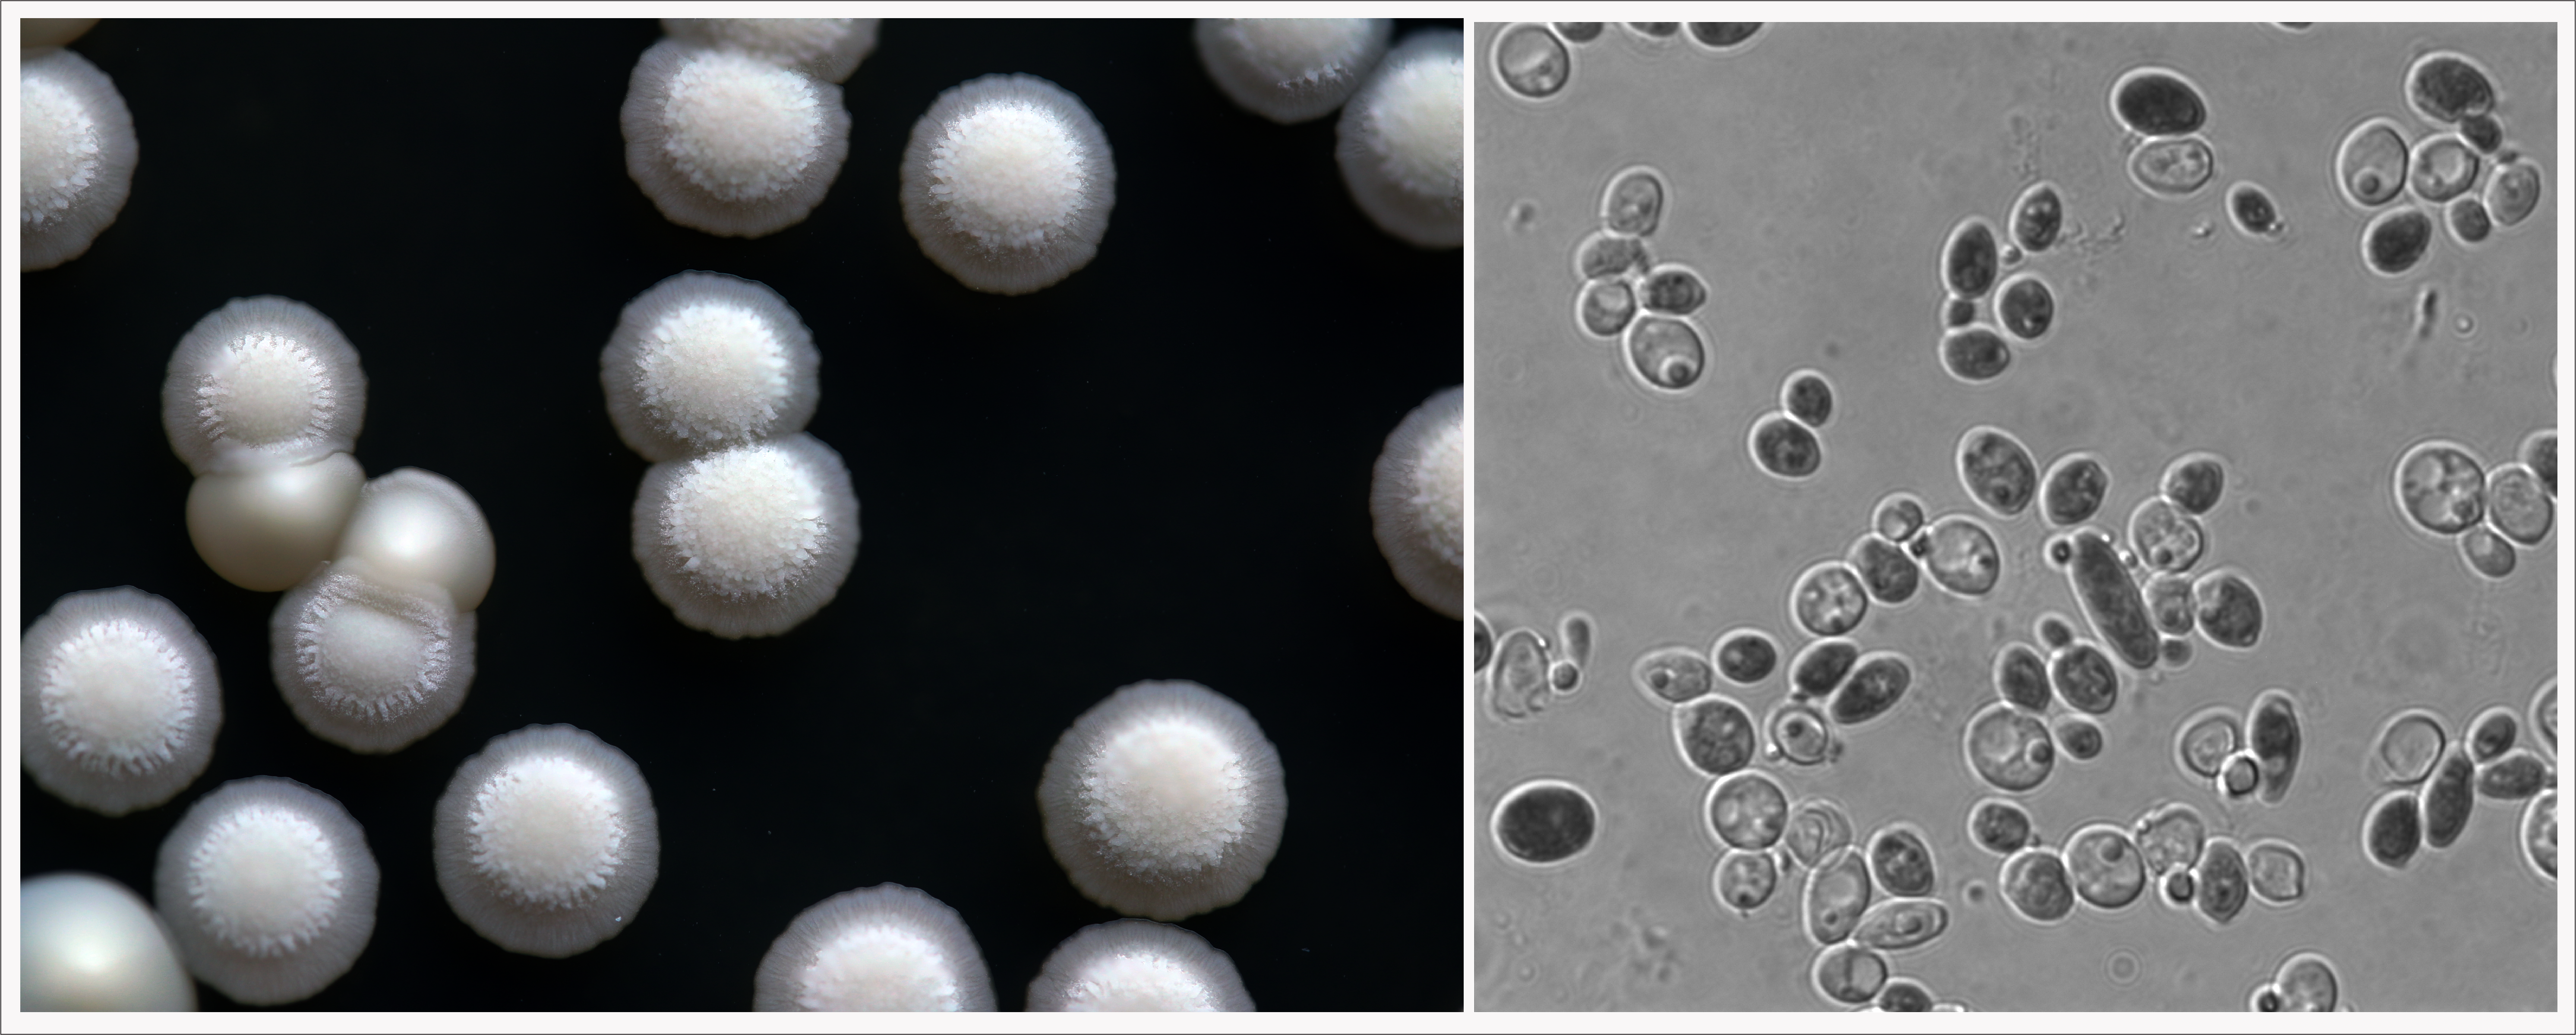 Left: W. anomalus are the highly textured white colonies.  Right: W. anomalus cells at magnification. 